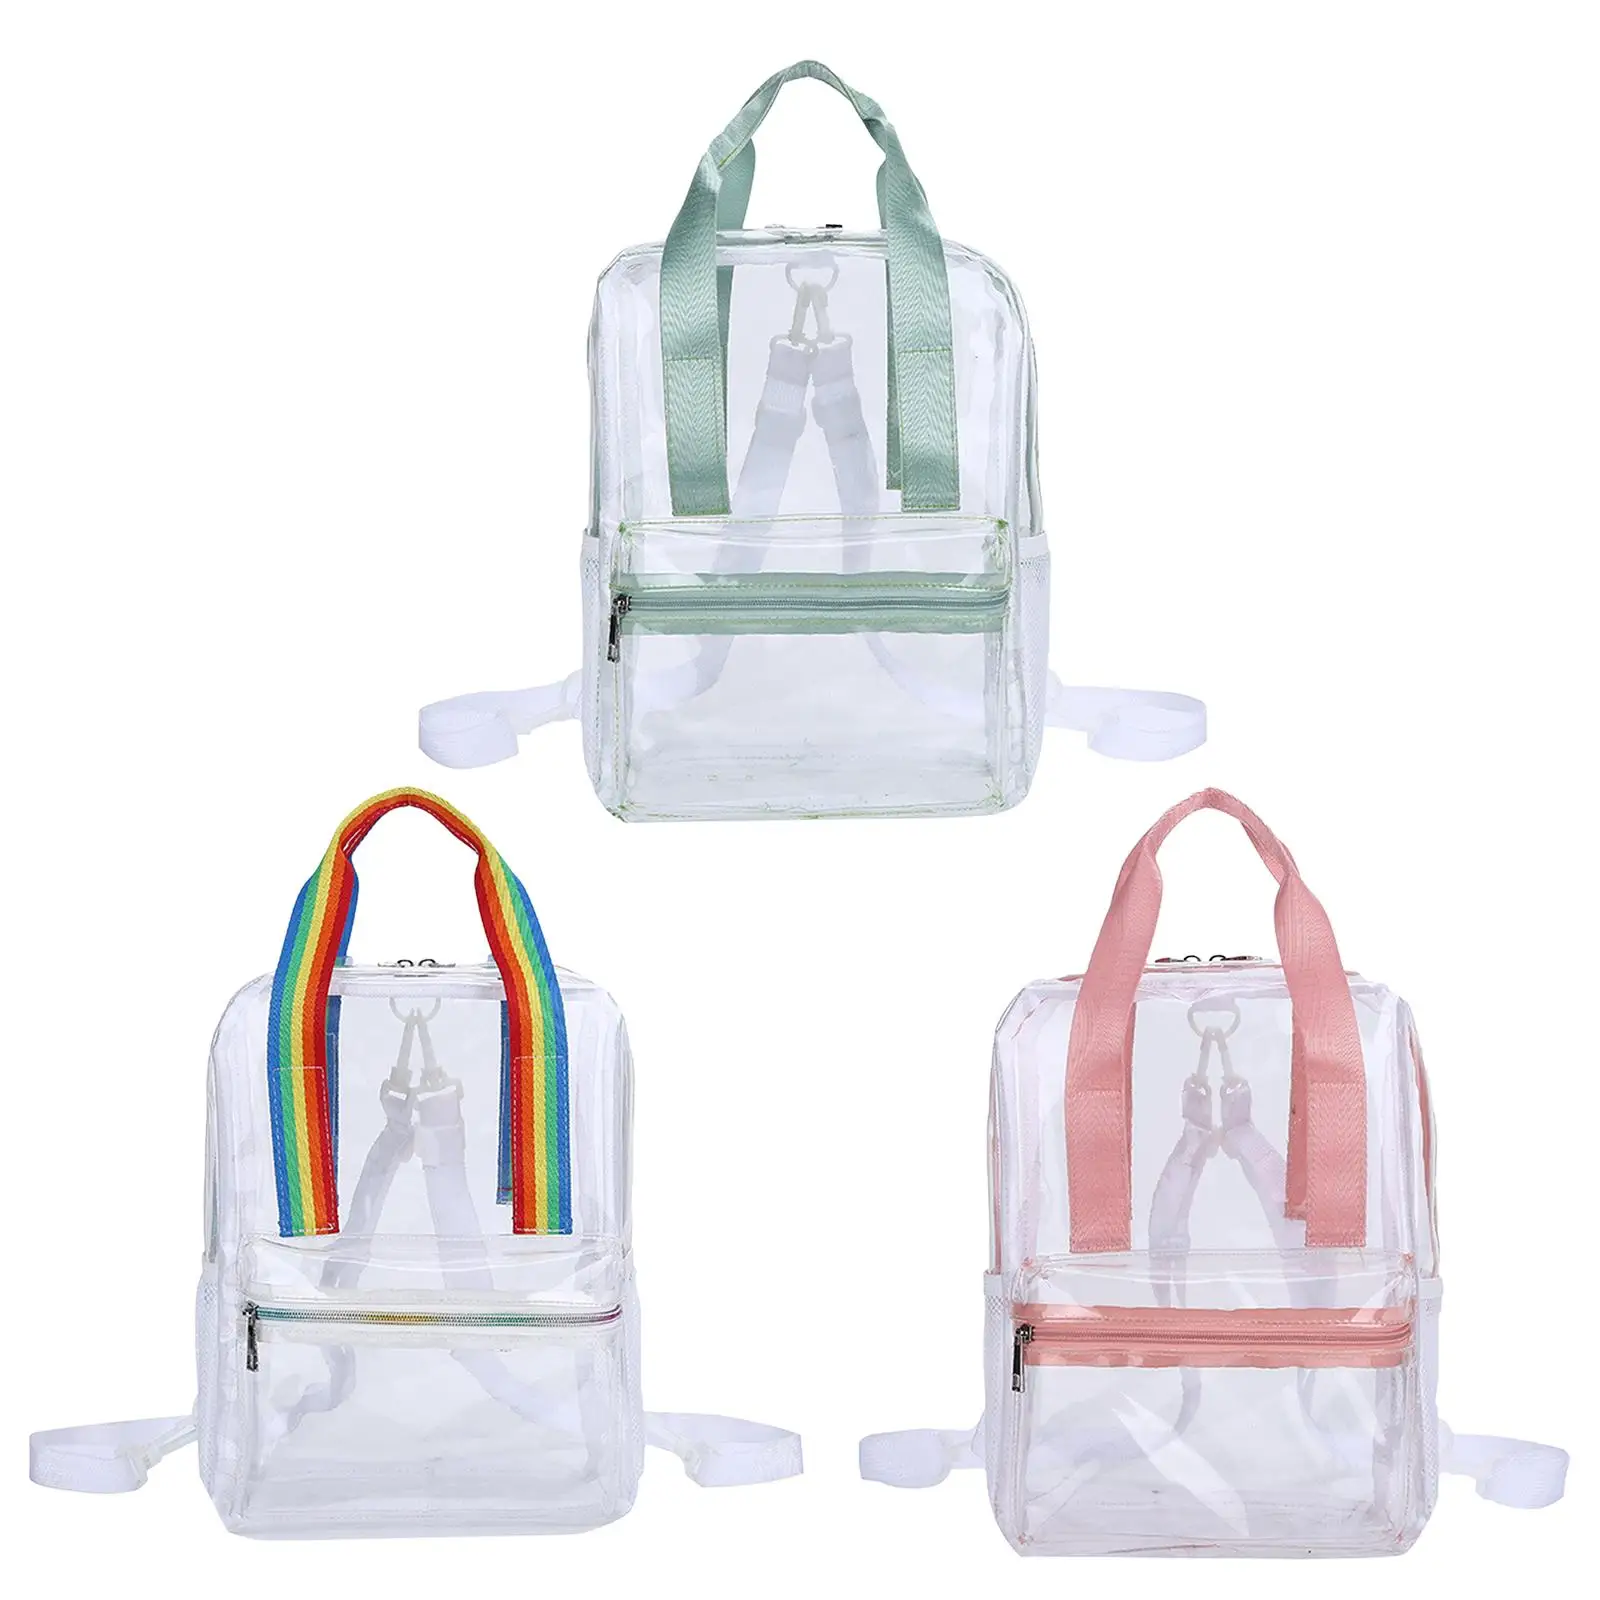 PVC Backpack Waterproof Large Notebook Transparent Back Bag with Adjustable Strap for Camping Travel Workplace Sports Swimming